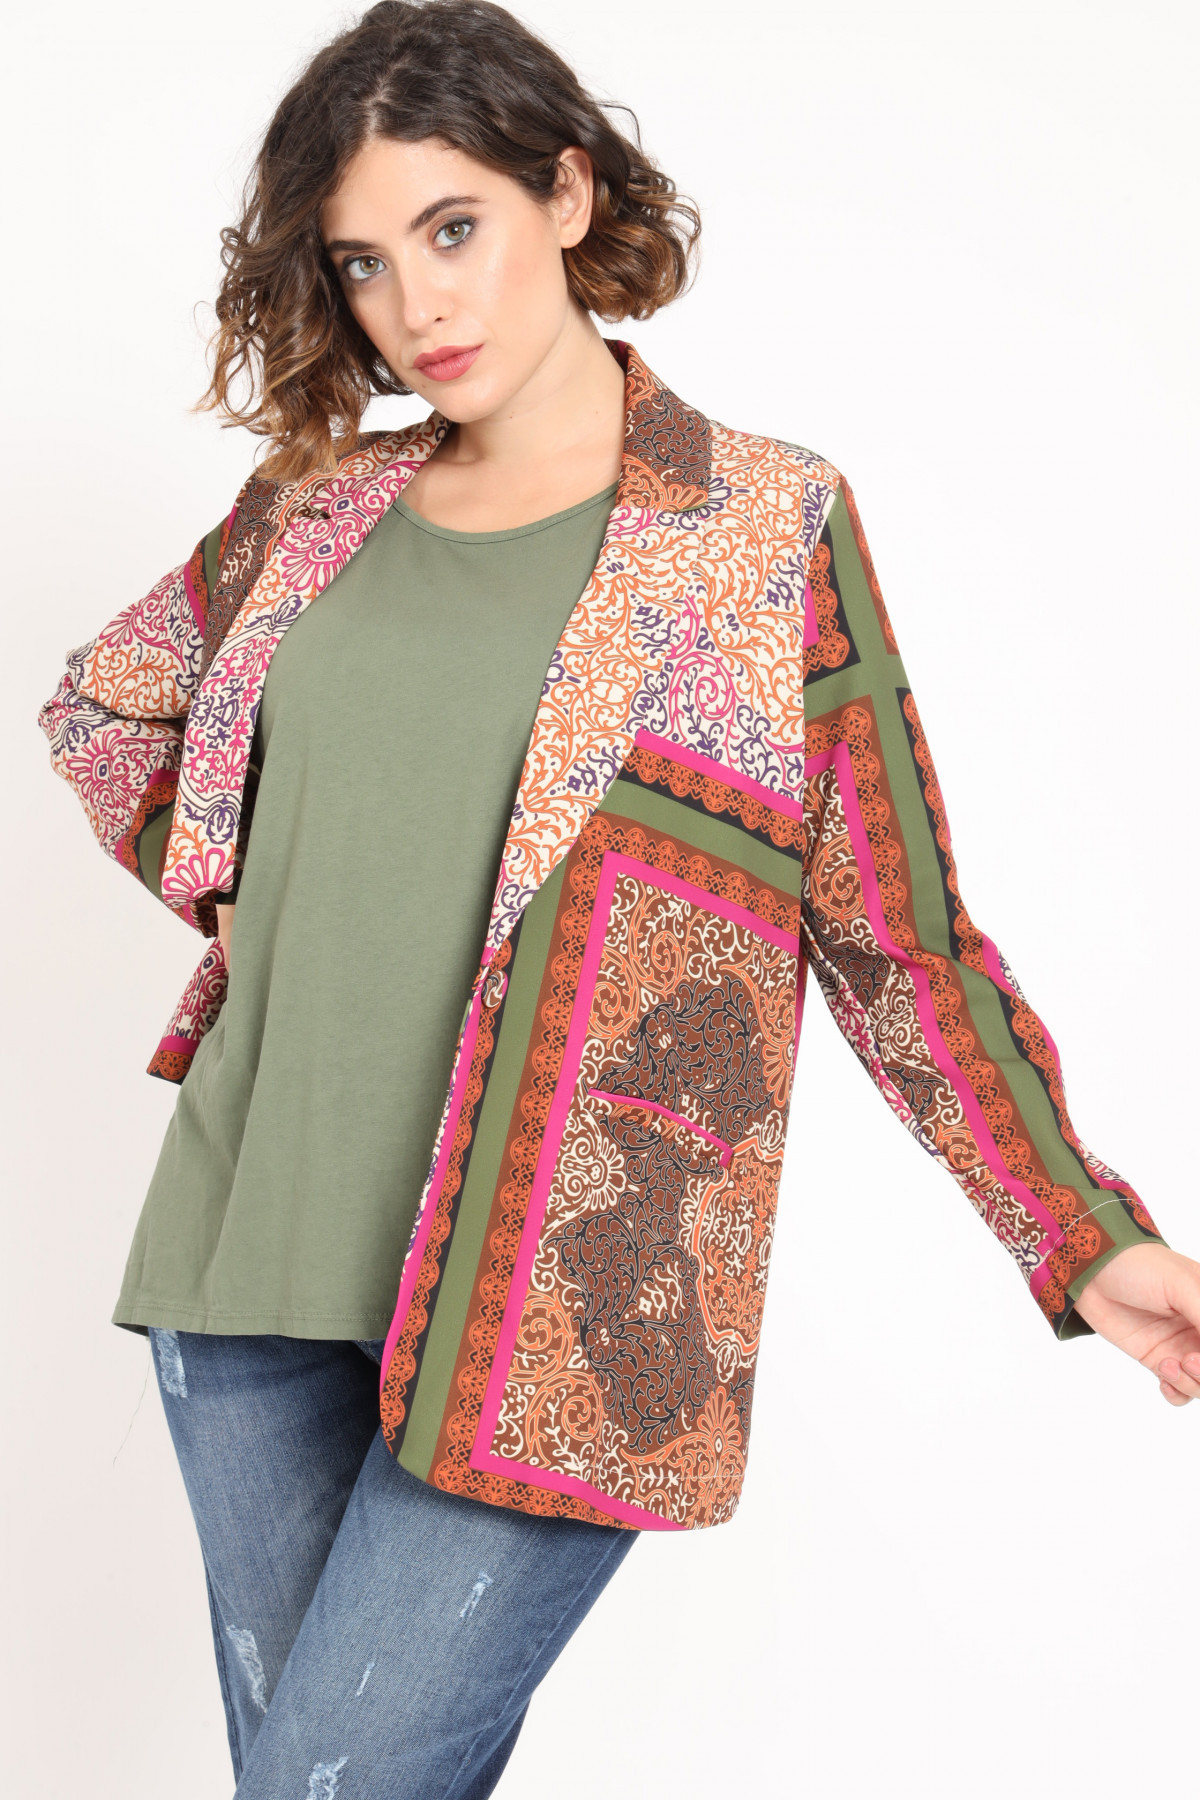 Jacket with Shawl Lapel in Indian Fantasy Print